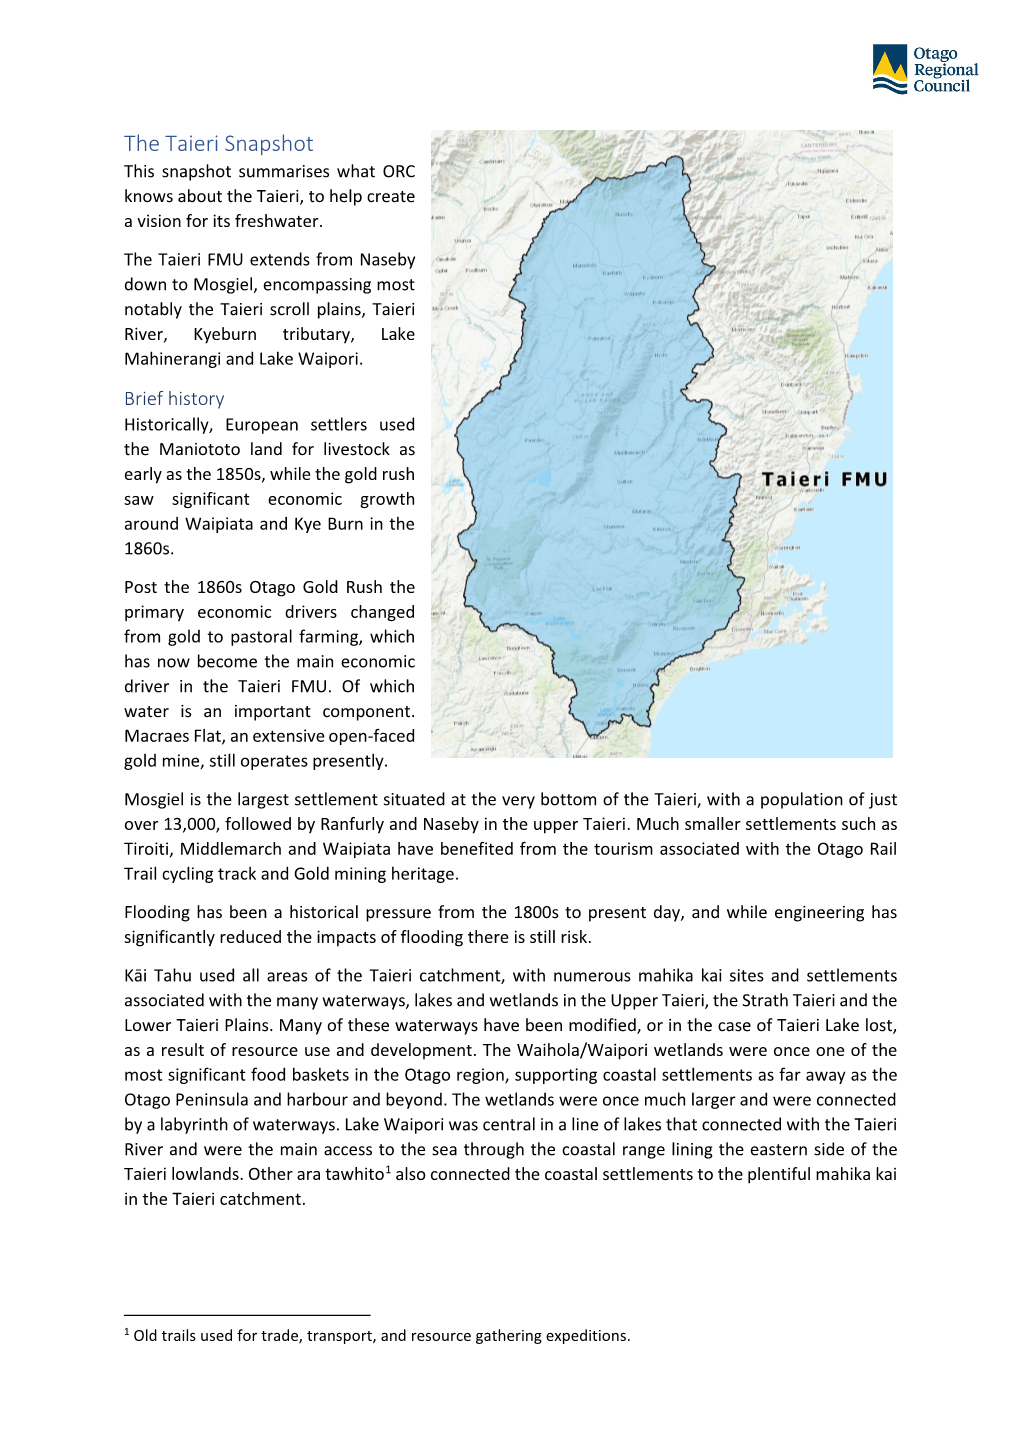 The Taieri Snapshot This Snapshot Summarises What ORC Knows About the Taieri, to Help Create a Vision for Its Freshwater